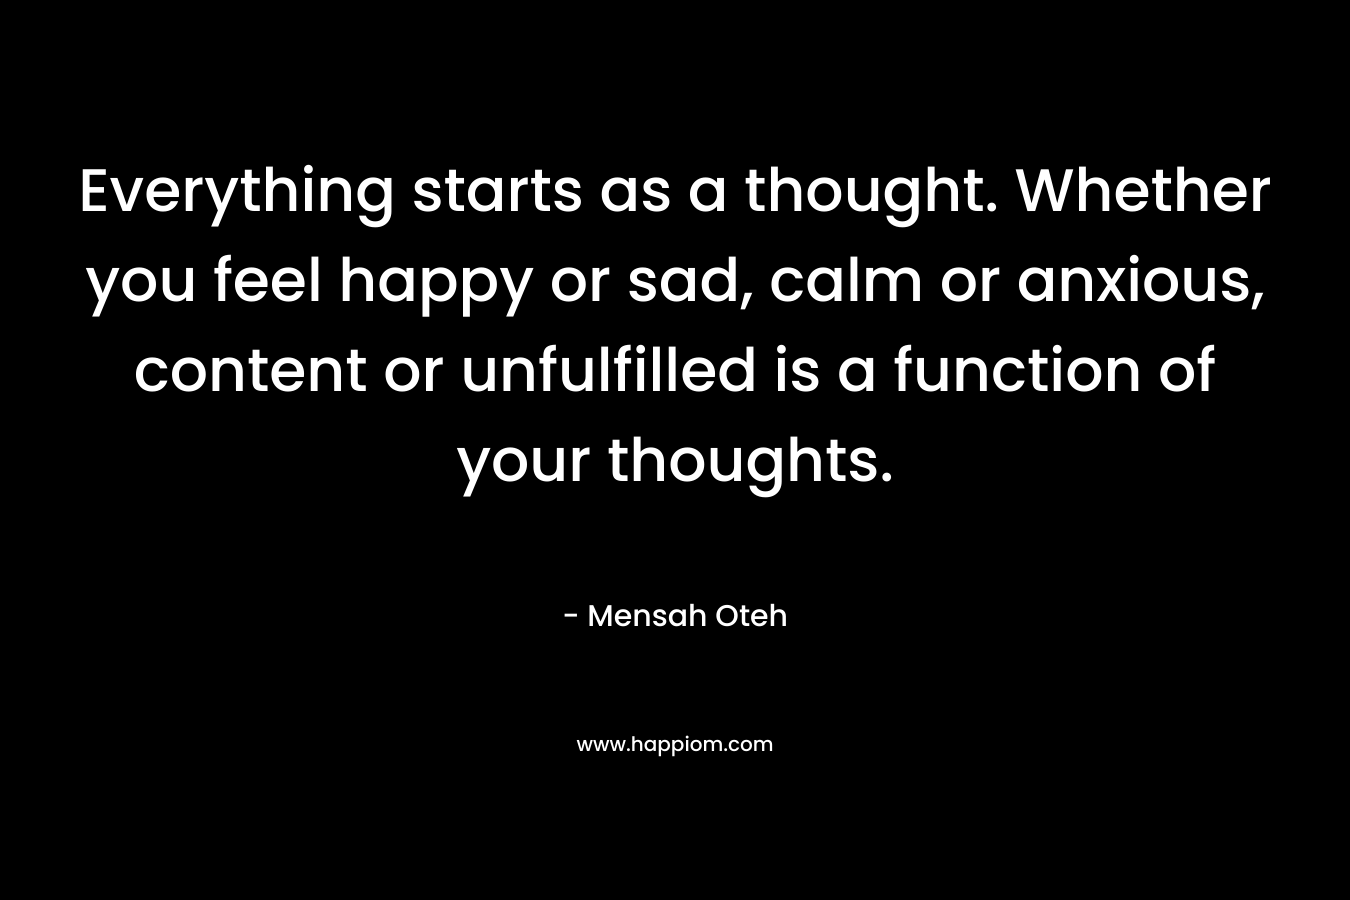 Everything starts as a thought. Whether you feel happy or sad, calm or anxious, content or unfulfilled is a function of your thoughts. – Mensah Oteh